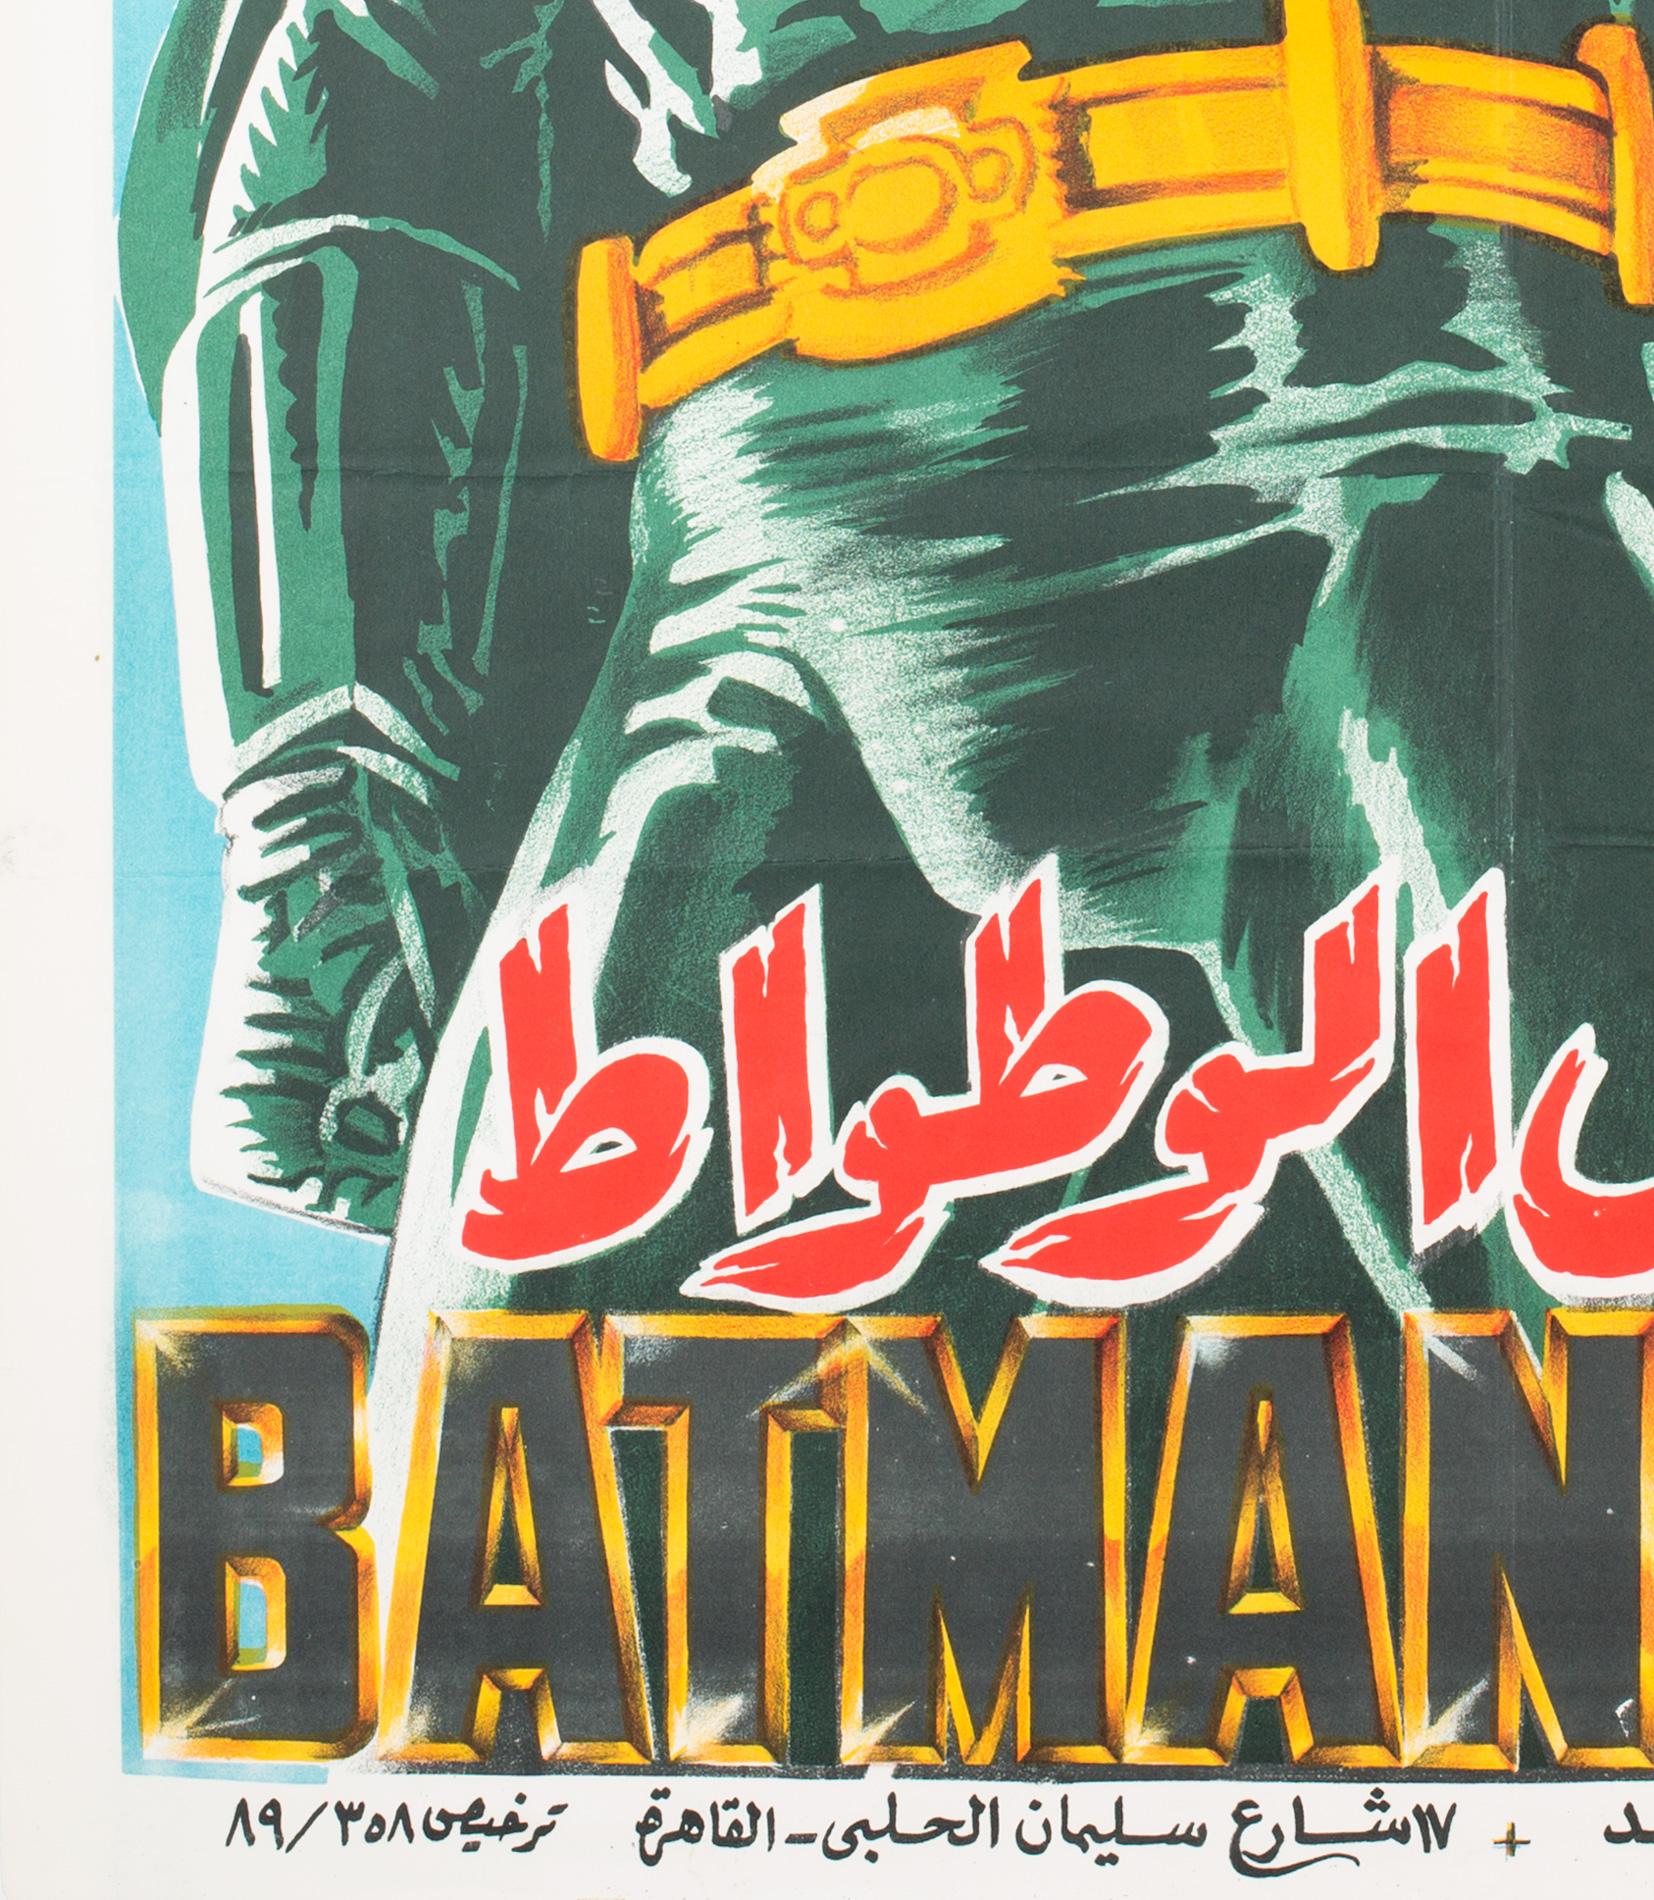 Fantastic Egyptian film poster for Tim Burton’s movie Batman. 

This vintage film poster is sized: 27 1/2 x 39 1/2 inches. In folded condition as issued (will be set rolled as stored). In near mint condition.